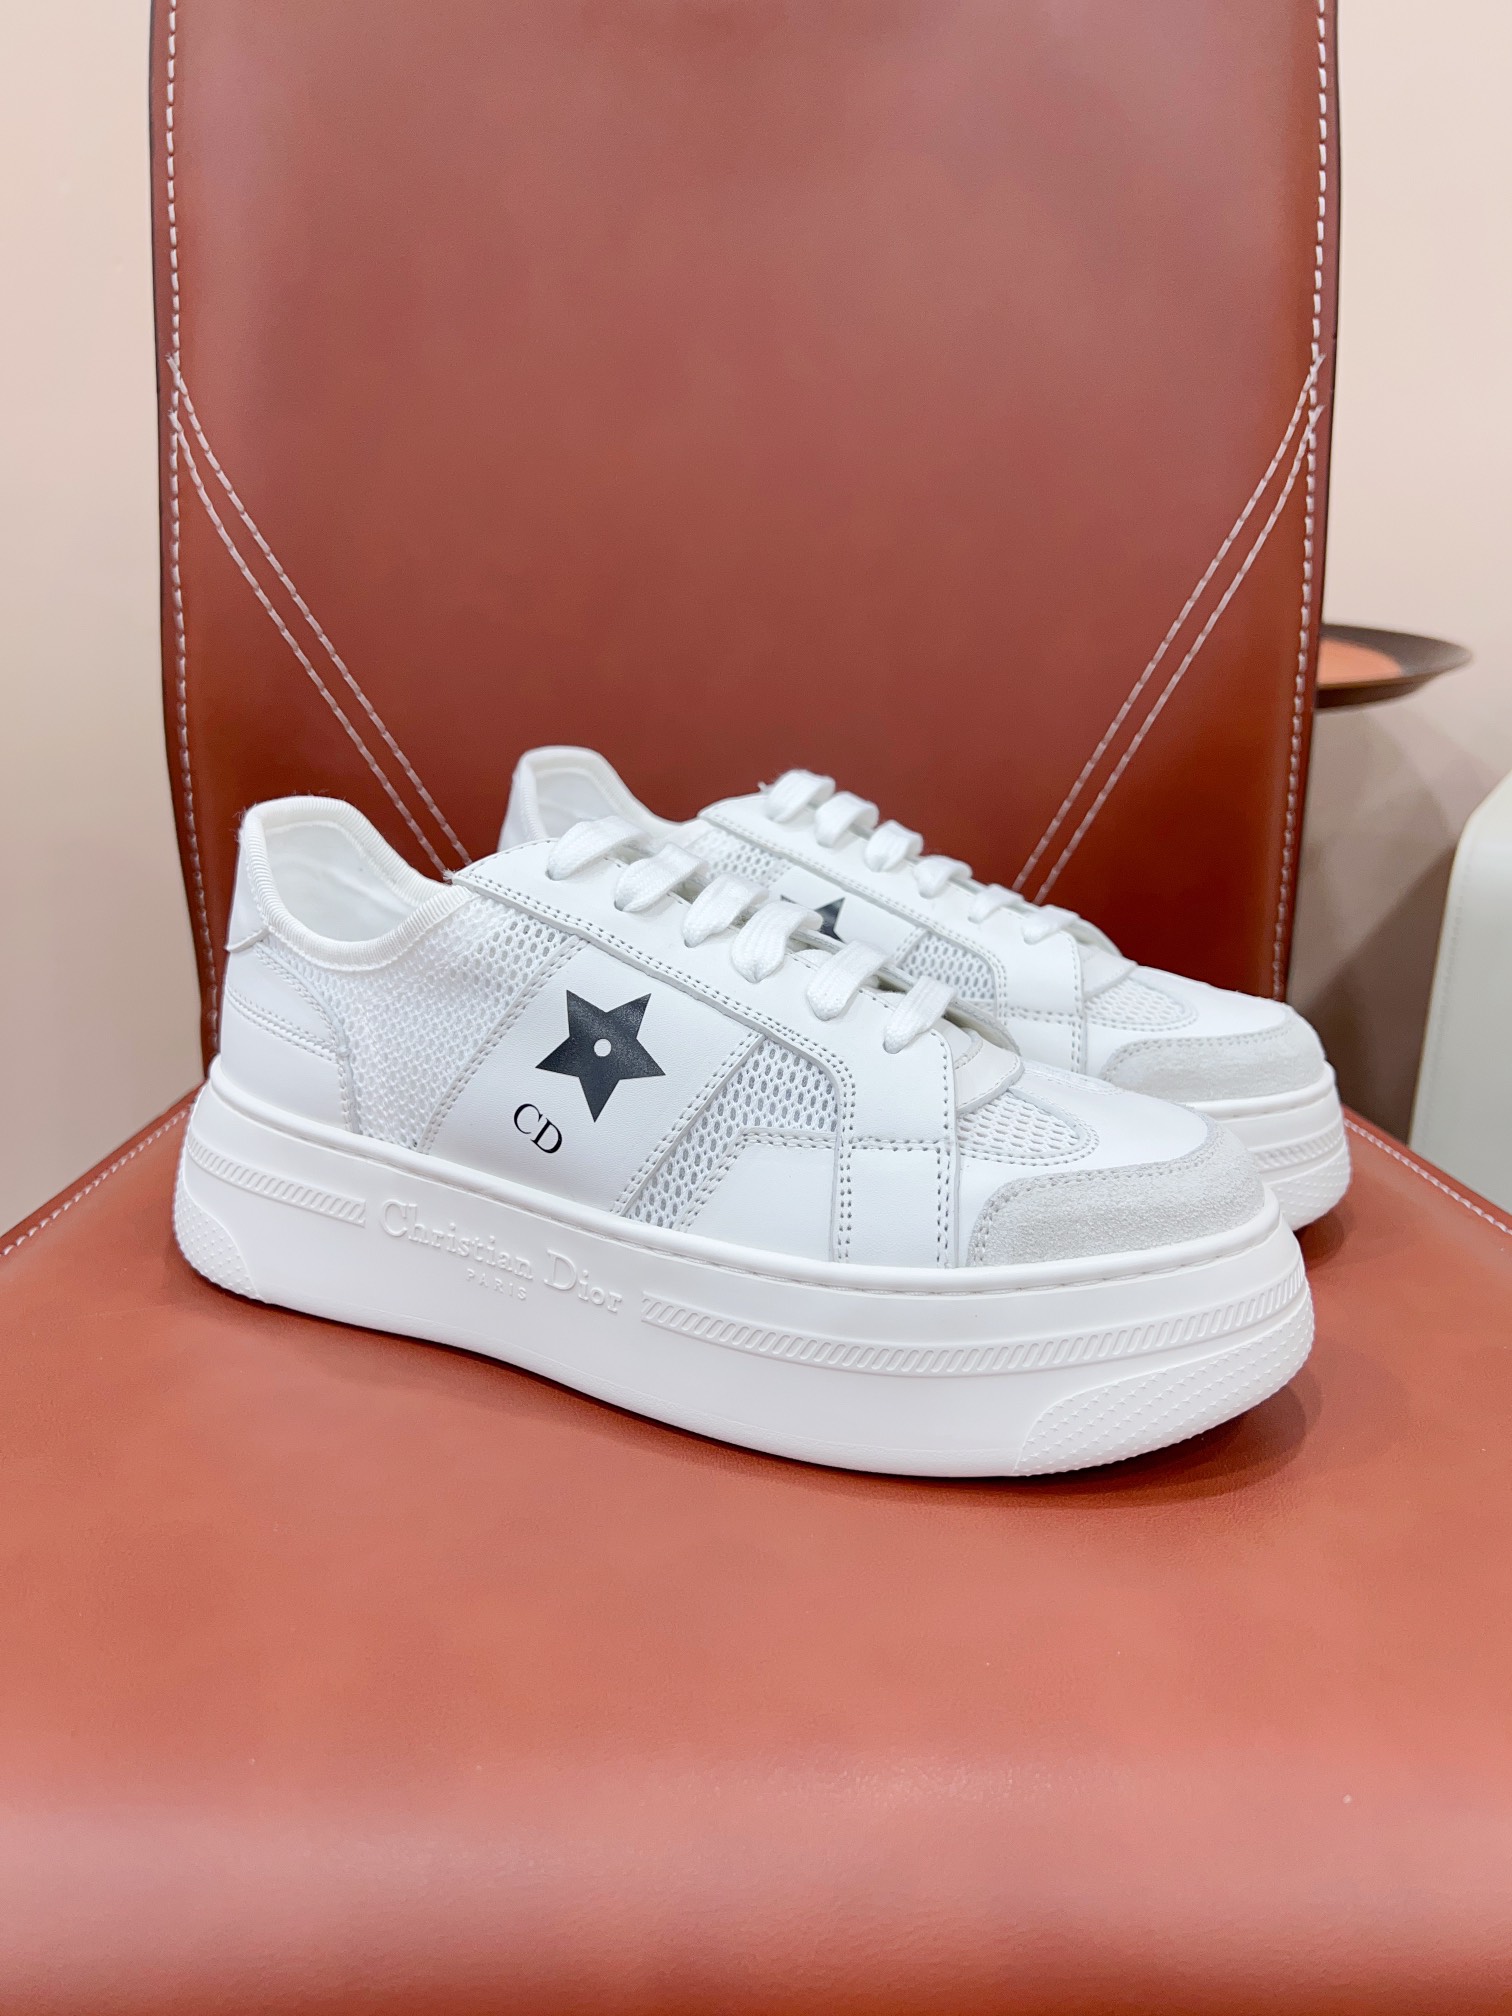 Dior Shoes Sneakers Cowhide Silk Casual